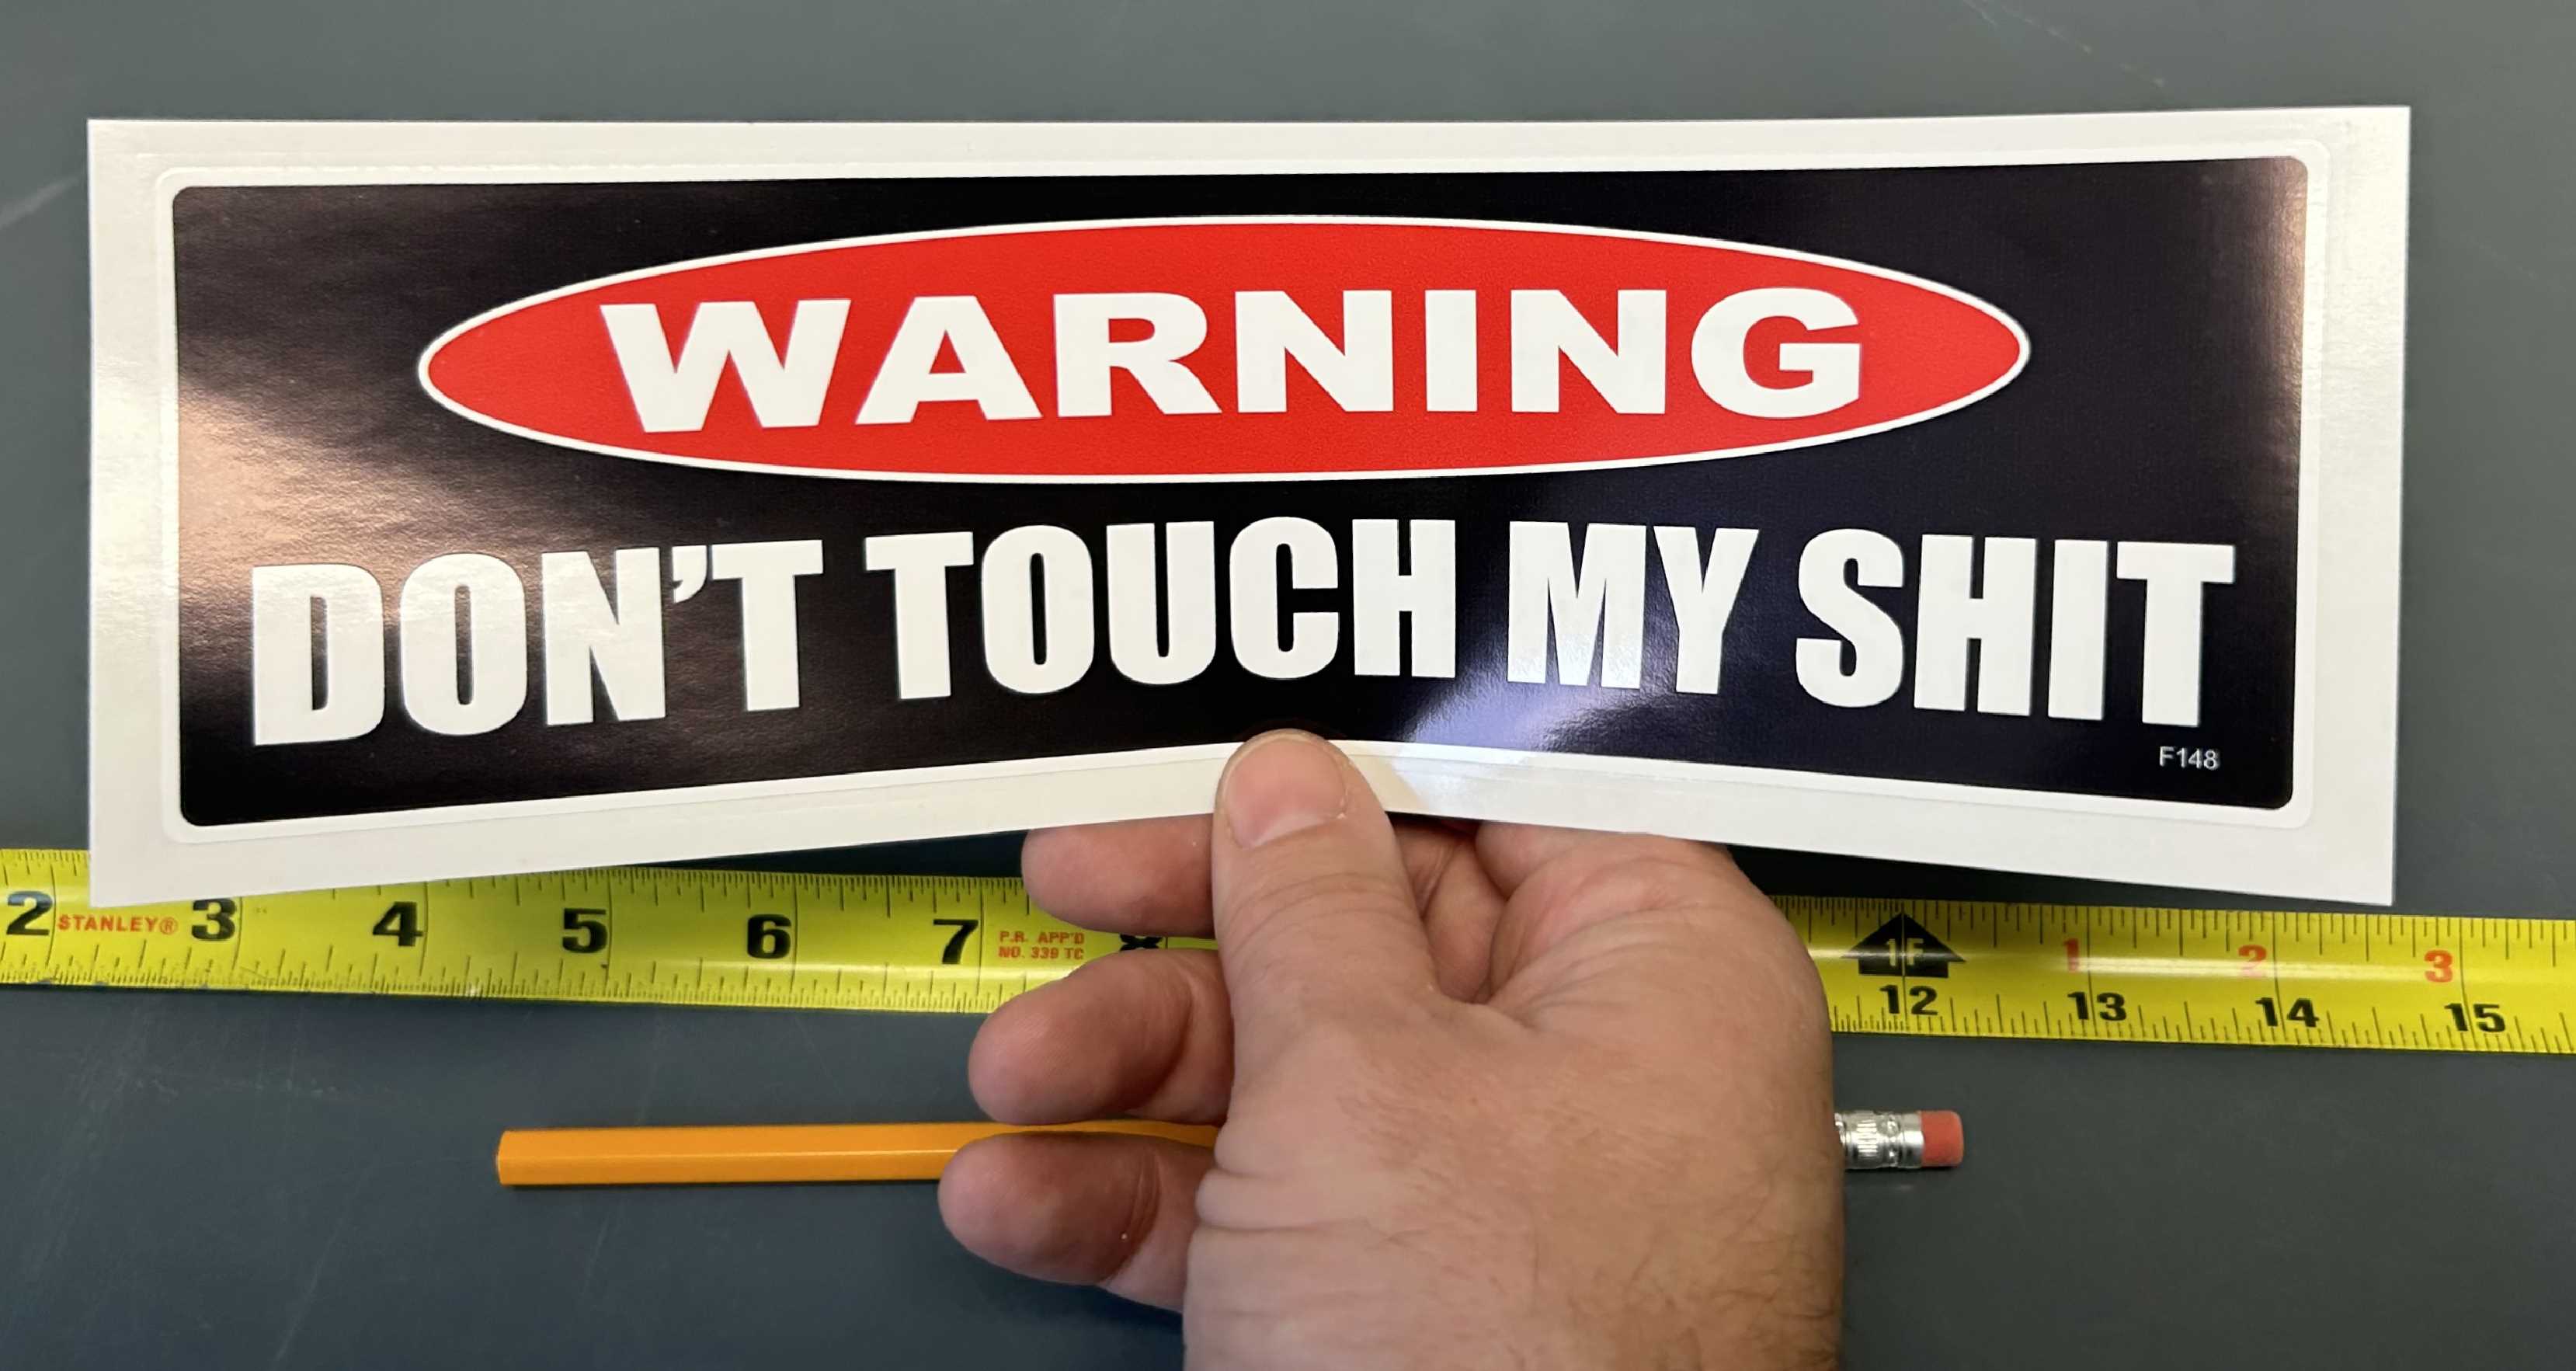 WARNING: DON'T TOUCH MY SHIT - FUNNY BUMPER STICKER IN HAND